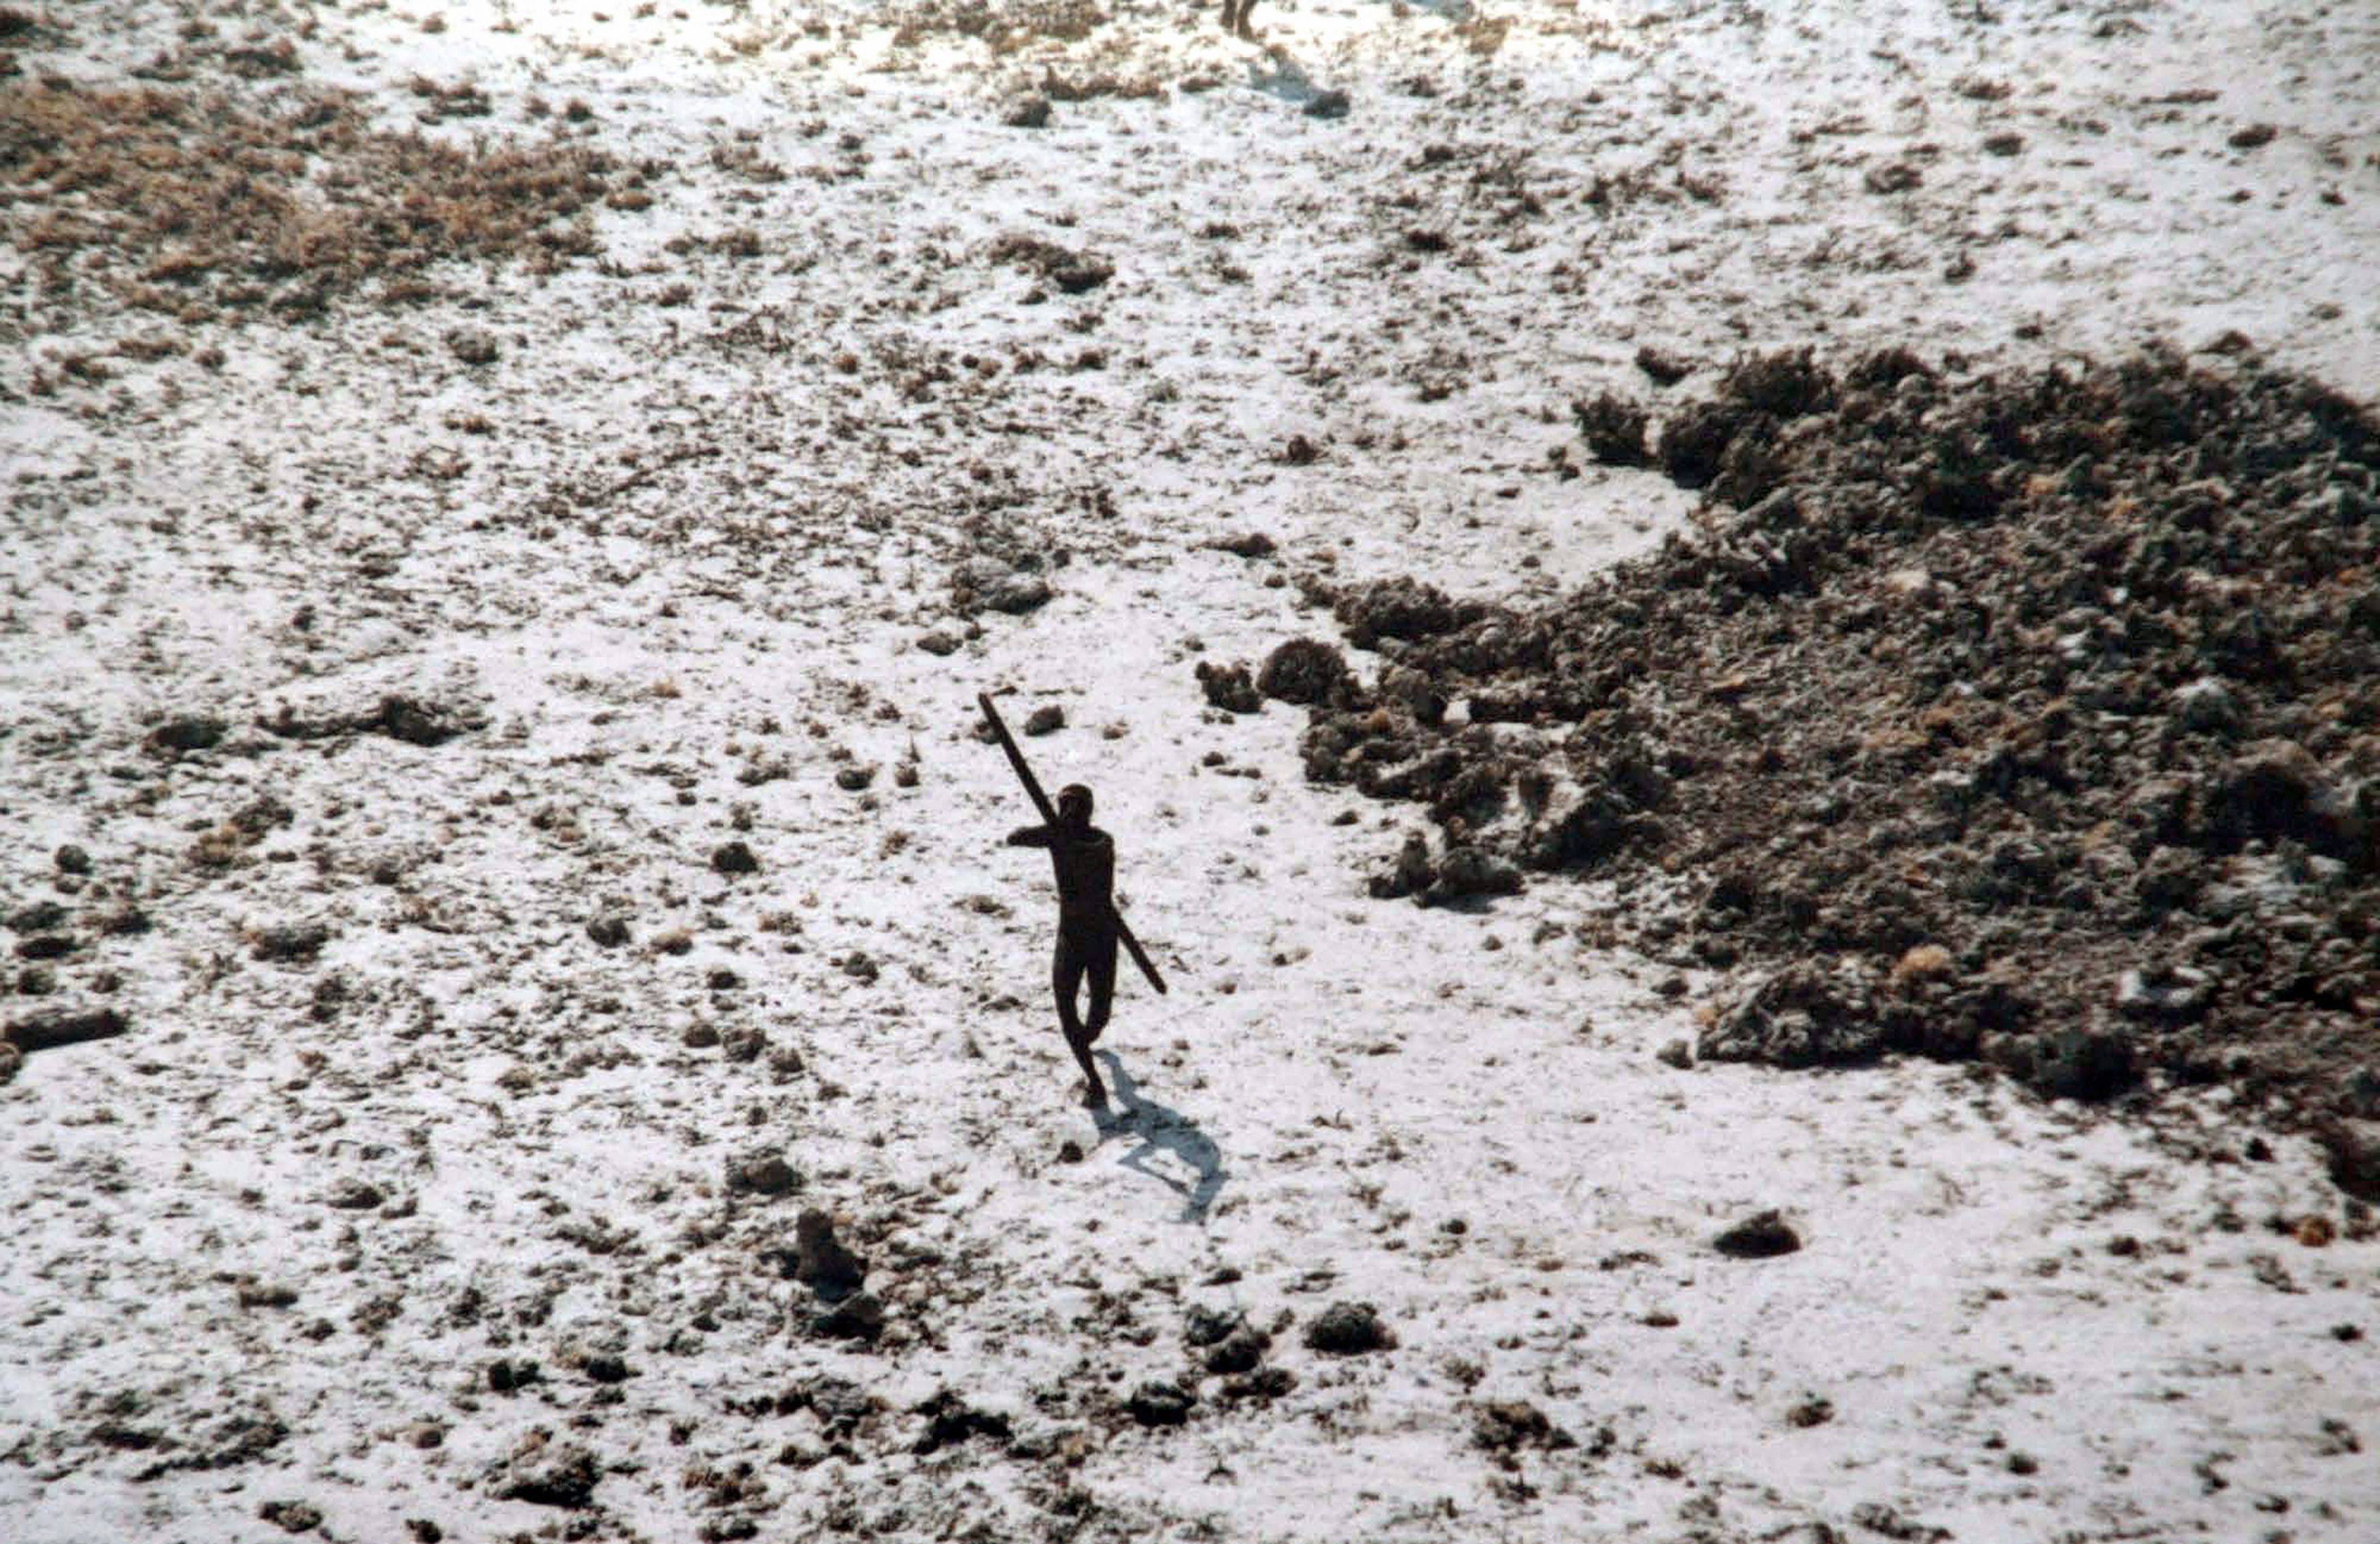 A man with the Sentinelese tribe aims his bow and arrow at an Indian Coast Guard helicopter as it flies over North Sentinel Island in the Andaman Islands. Hong Kong sailors feared attack when their ship ran aground there in 1981. Photo: AFP/Indian Coast Guard/Survival International